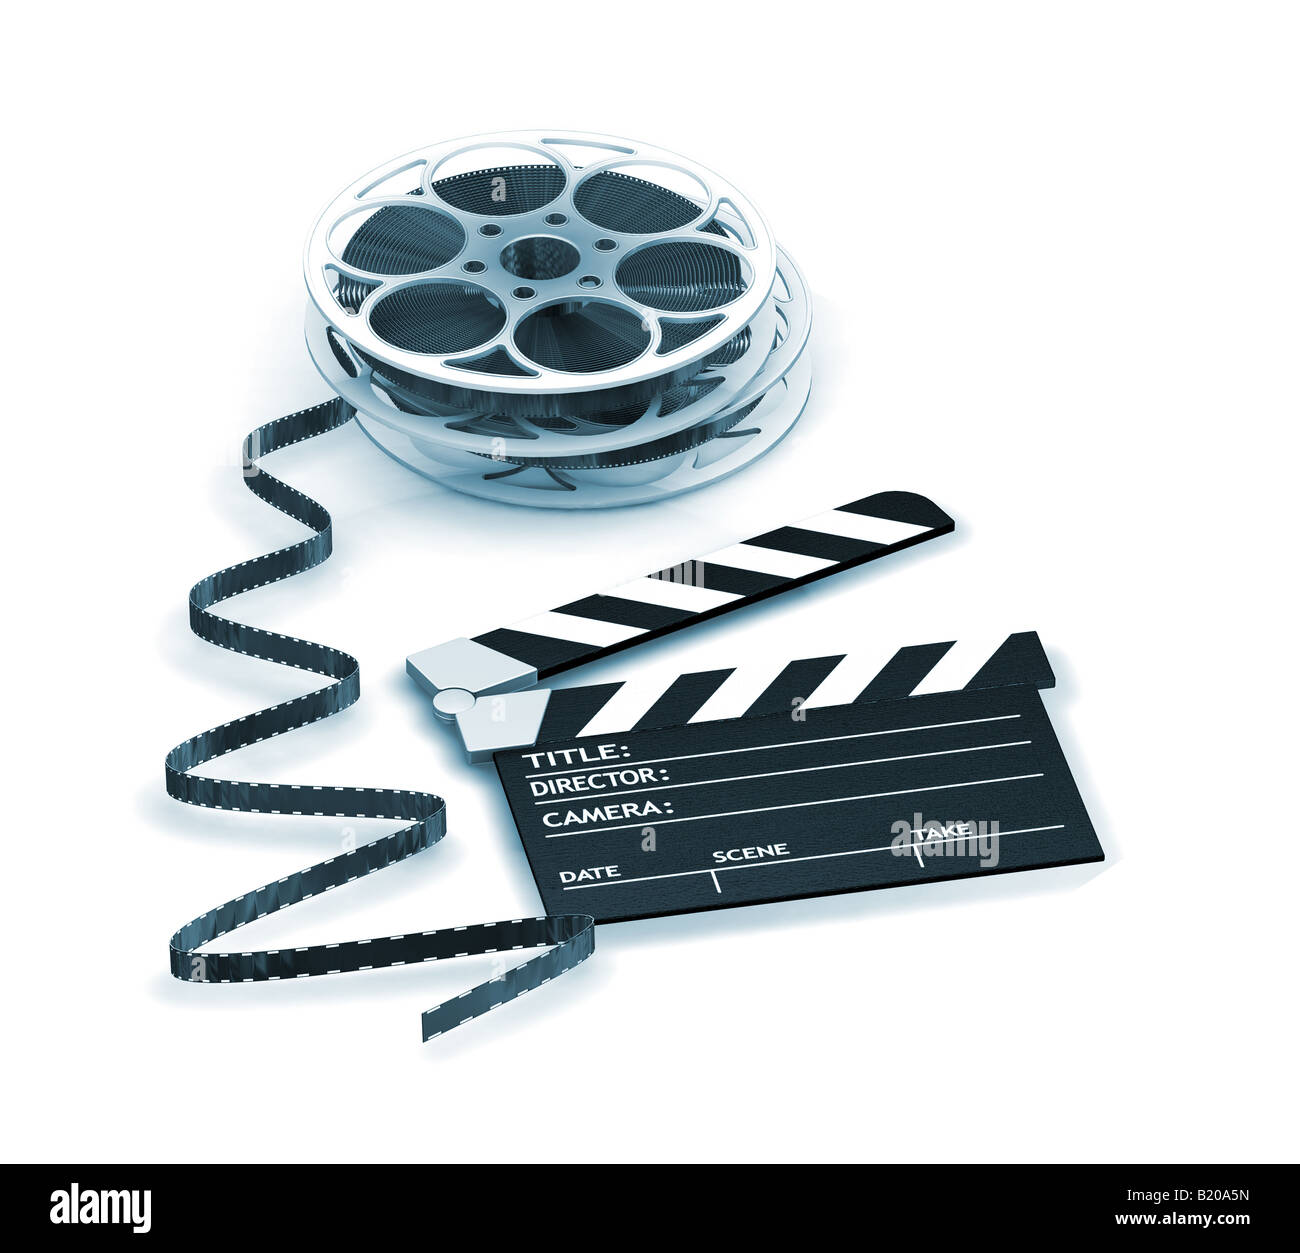 3D render of a clapper board and film reels Stock Photo